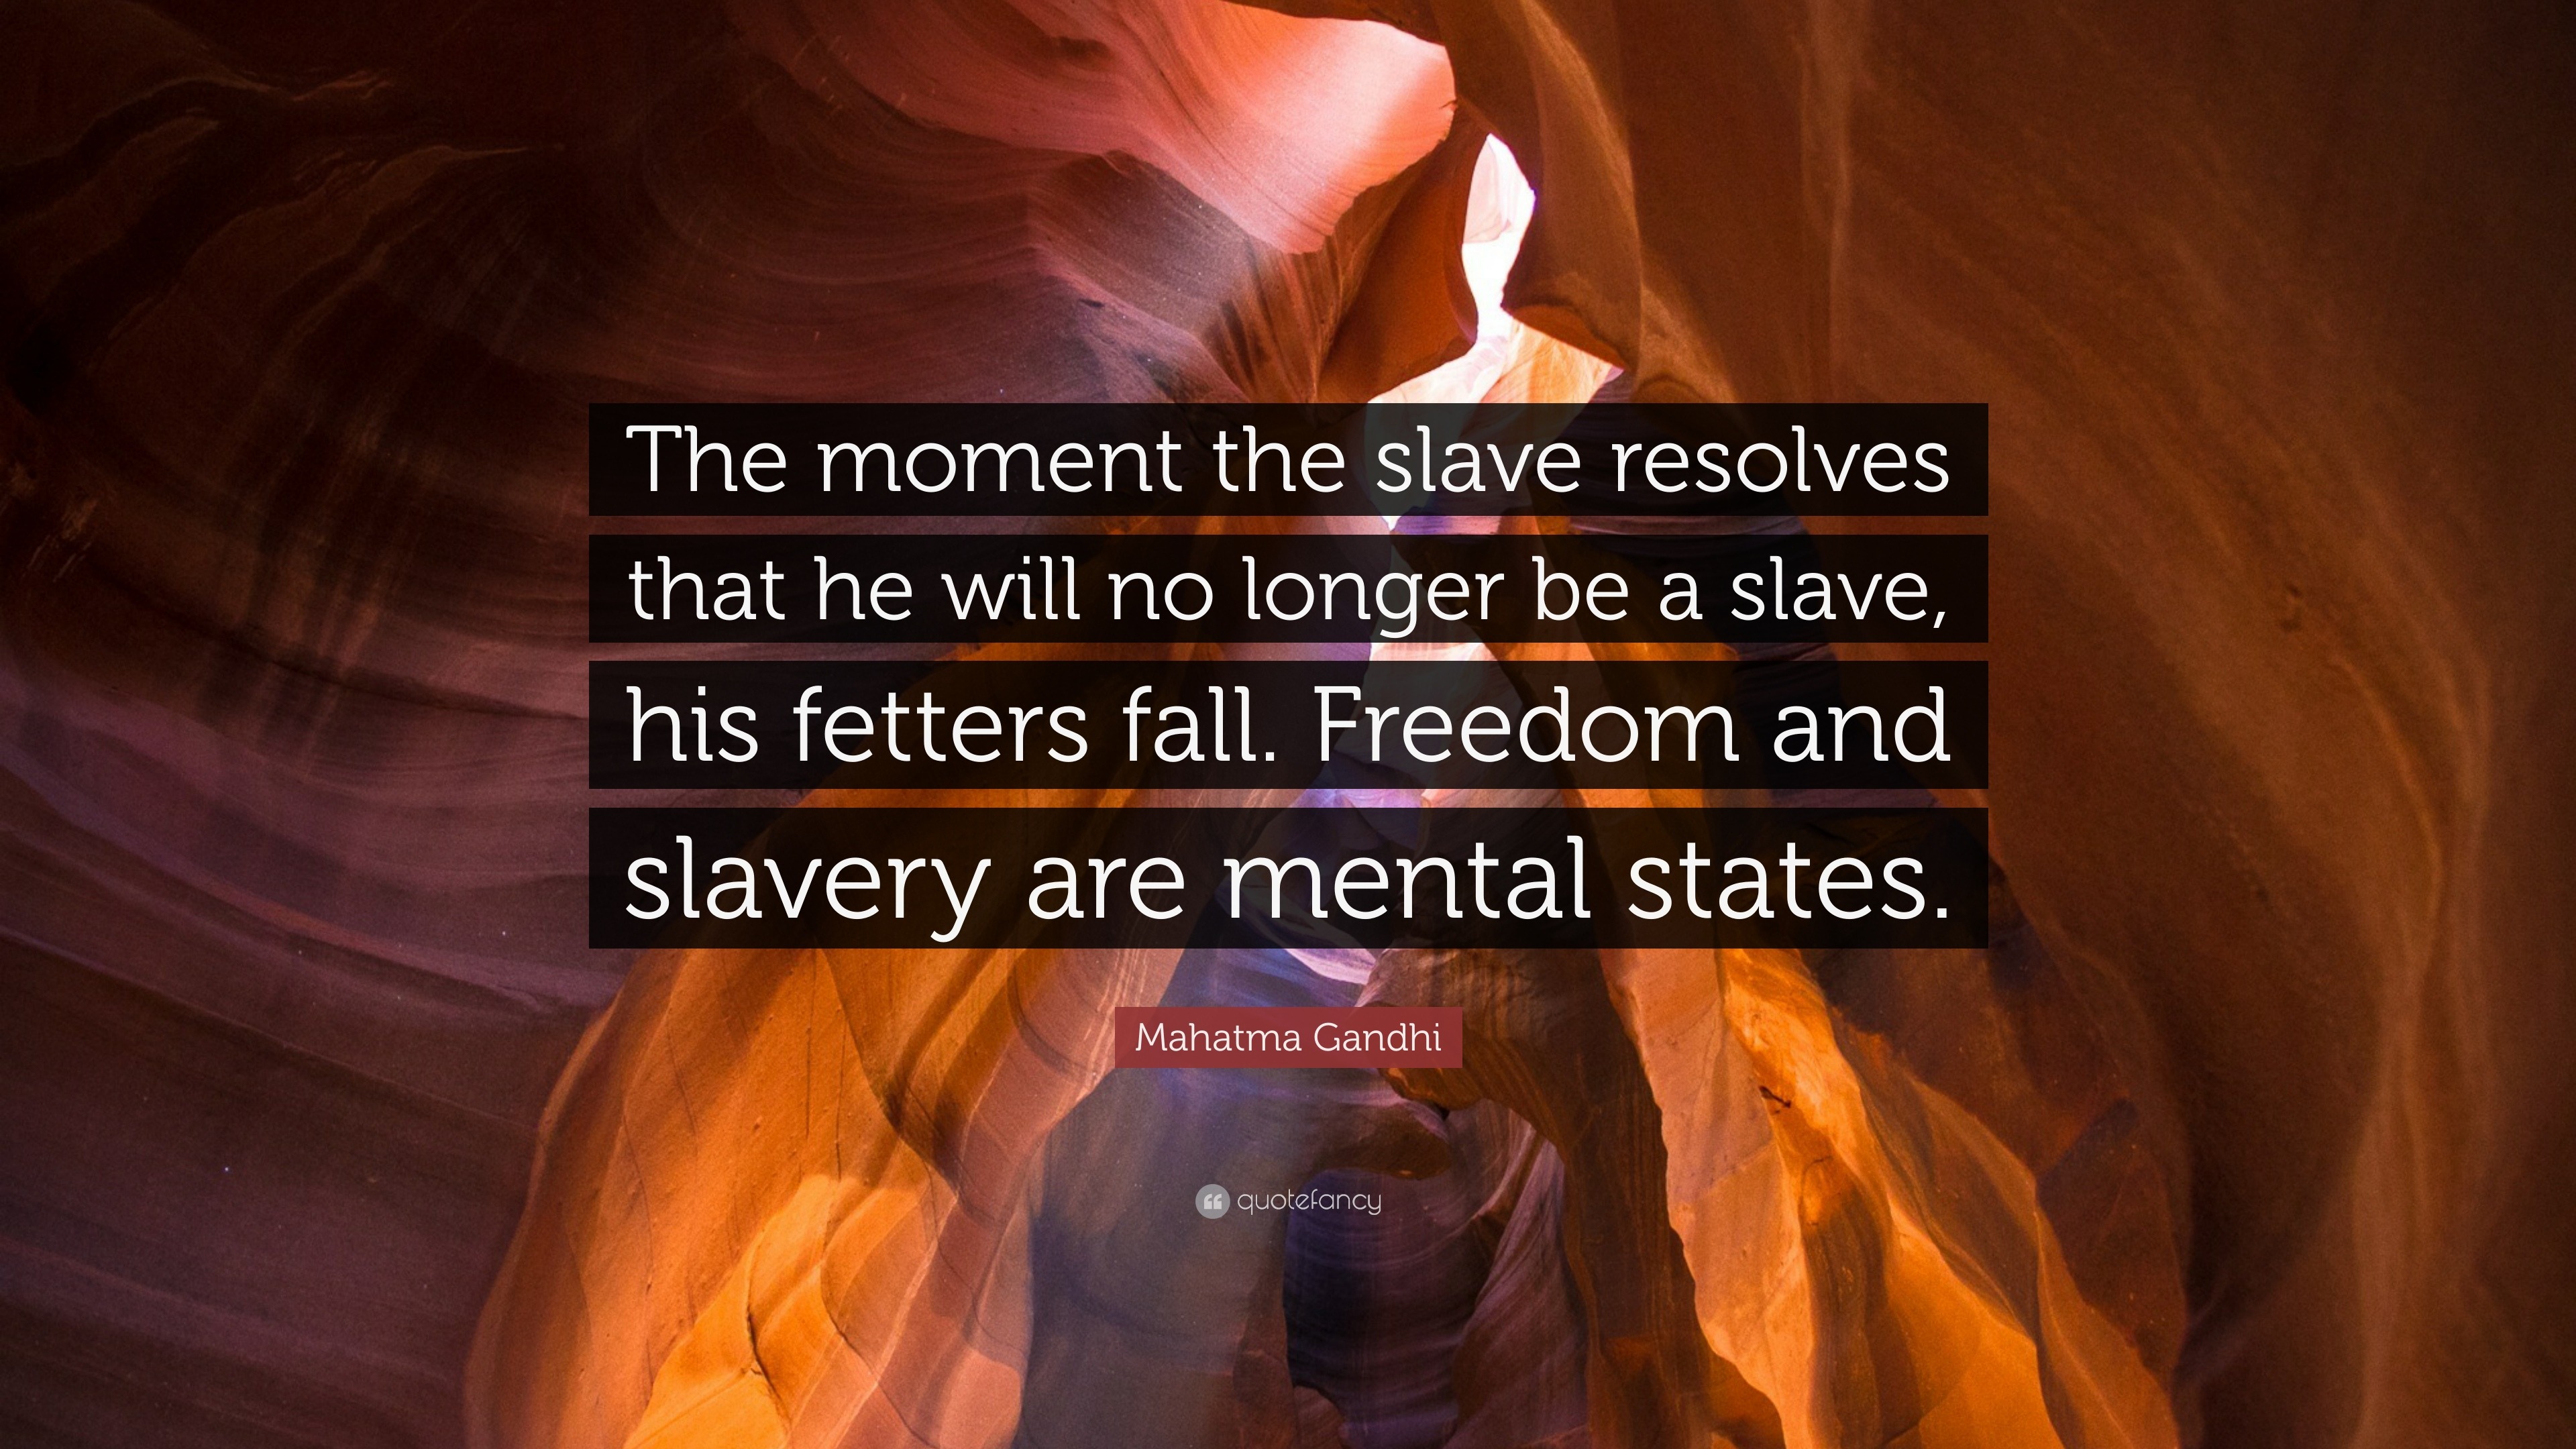 Mahatma Gandhi Quote: “The moment the slave resolves that he will no ...